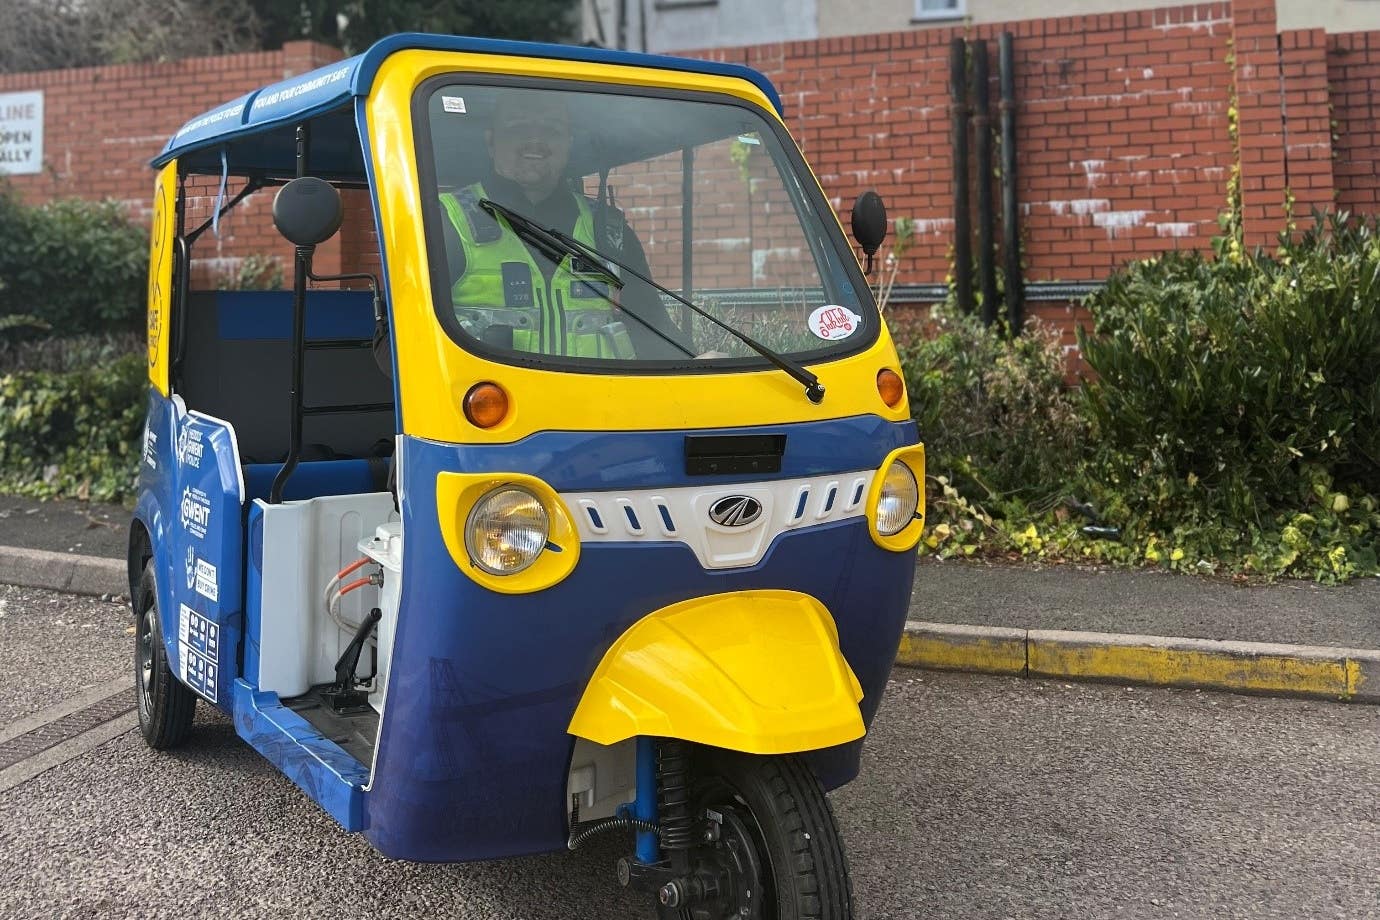 Tuk-tuks have been bought by Gwent Police in South Wales (Gwent Police/PA)